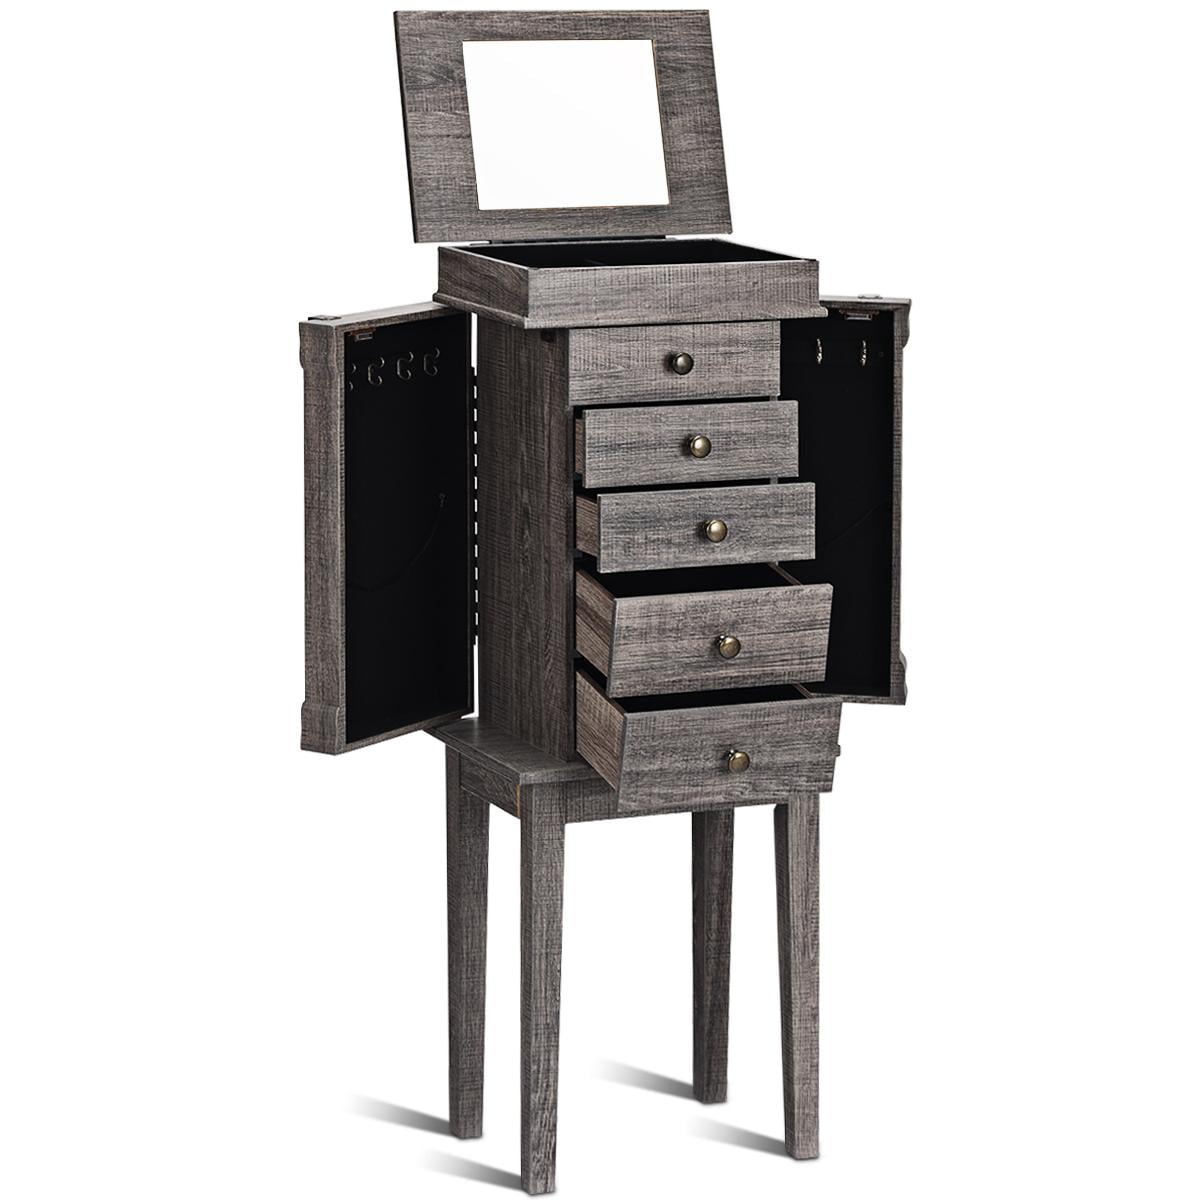 Giantex Drawers Armoire Cabinet, Dresser With Jewelry Storage On Top